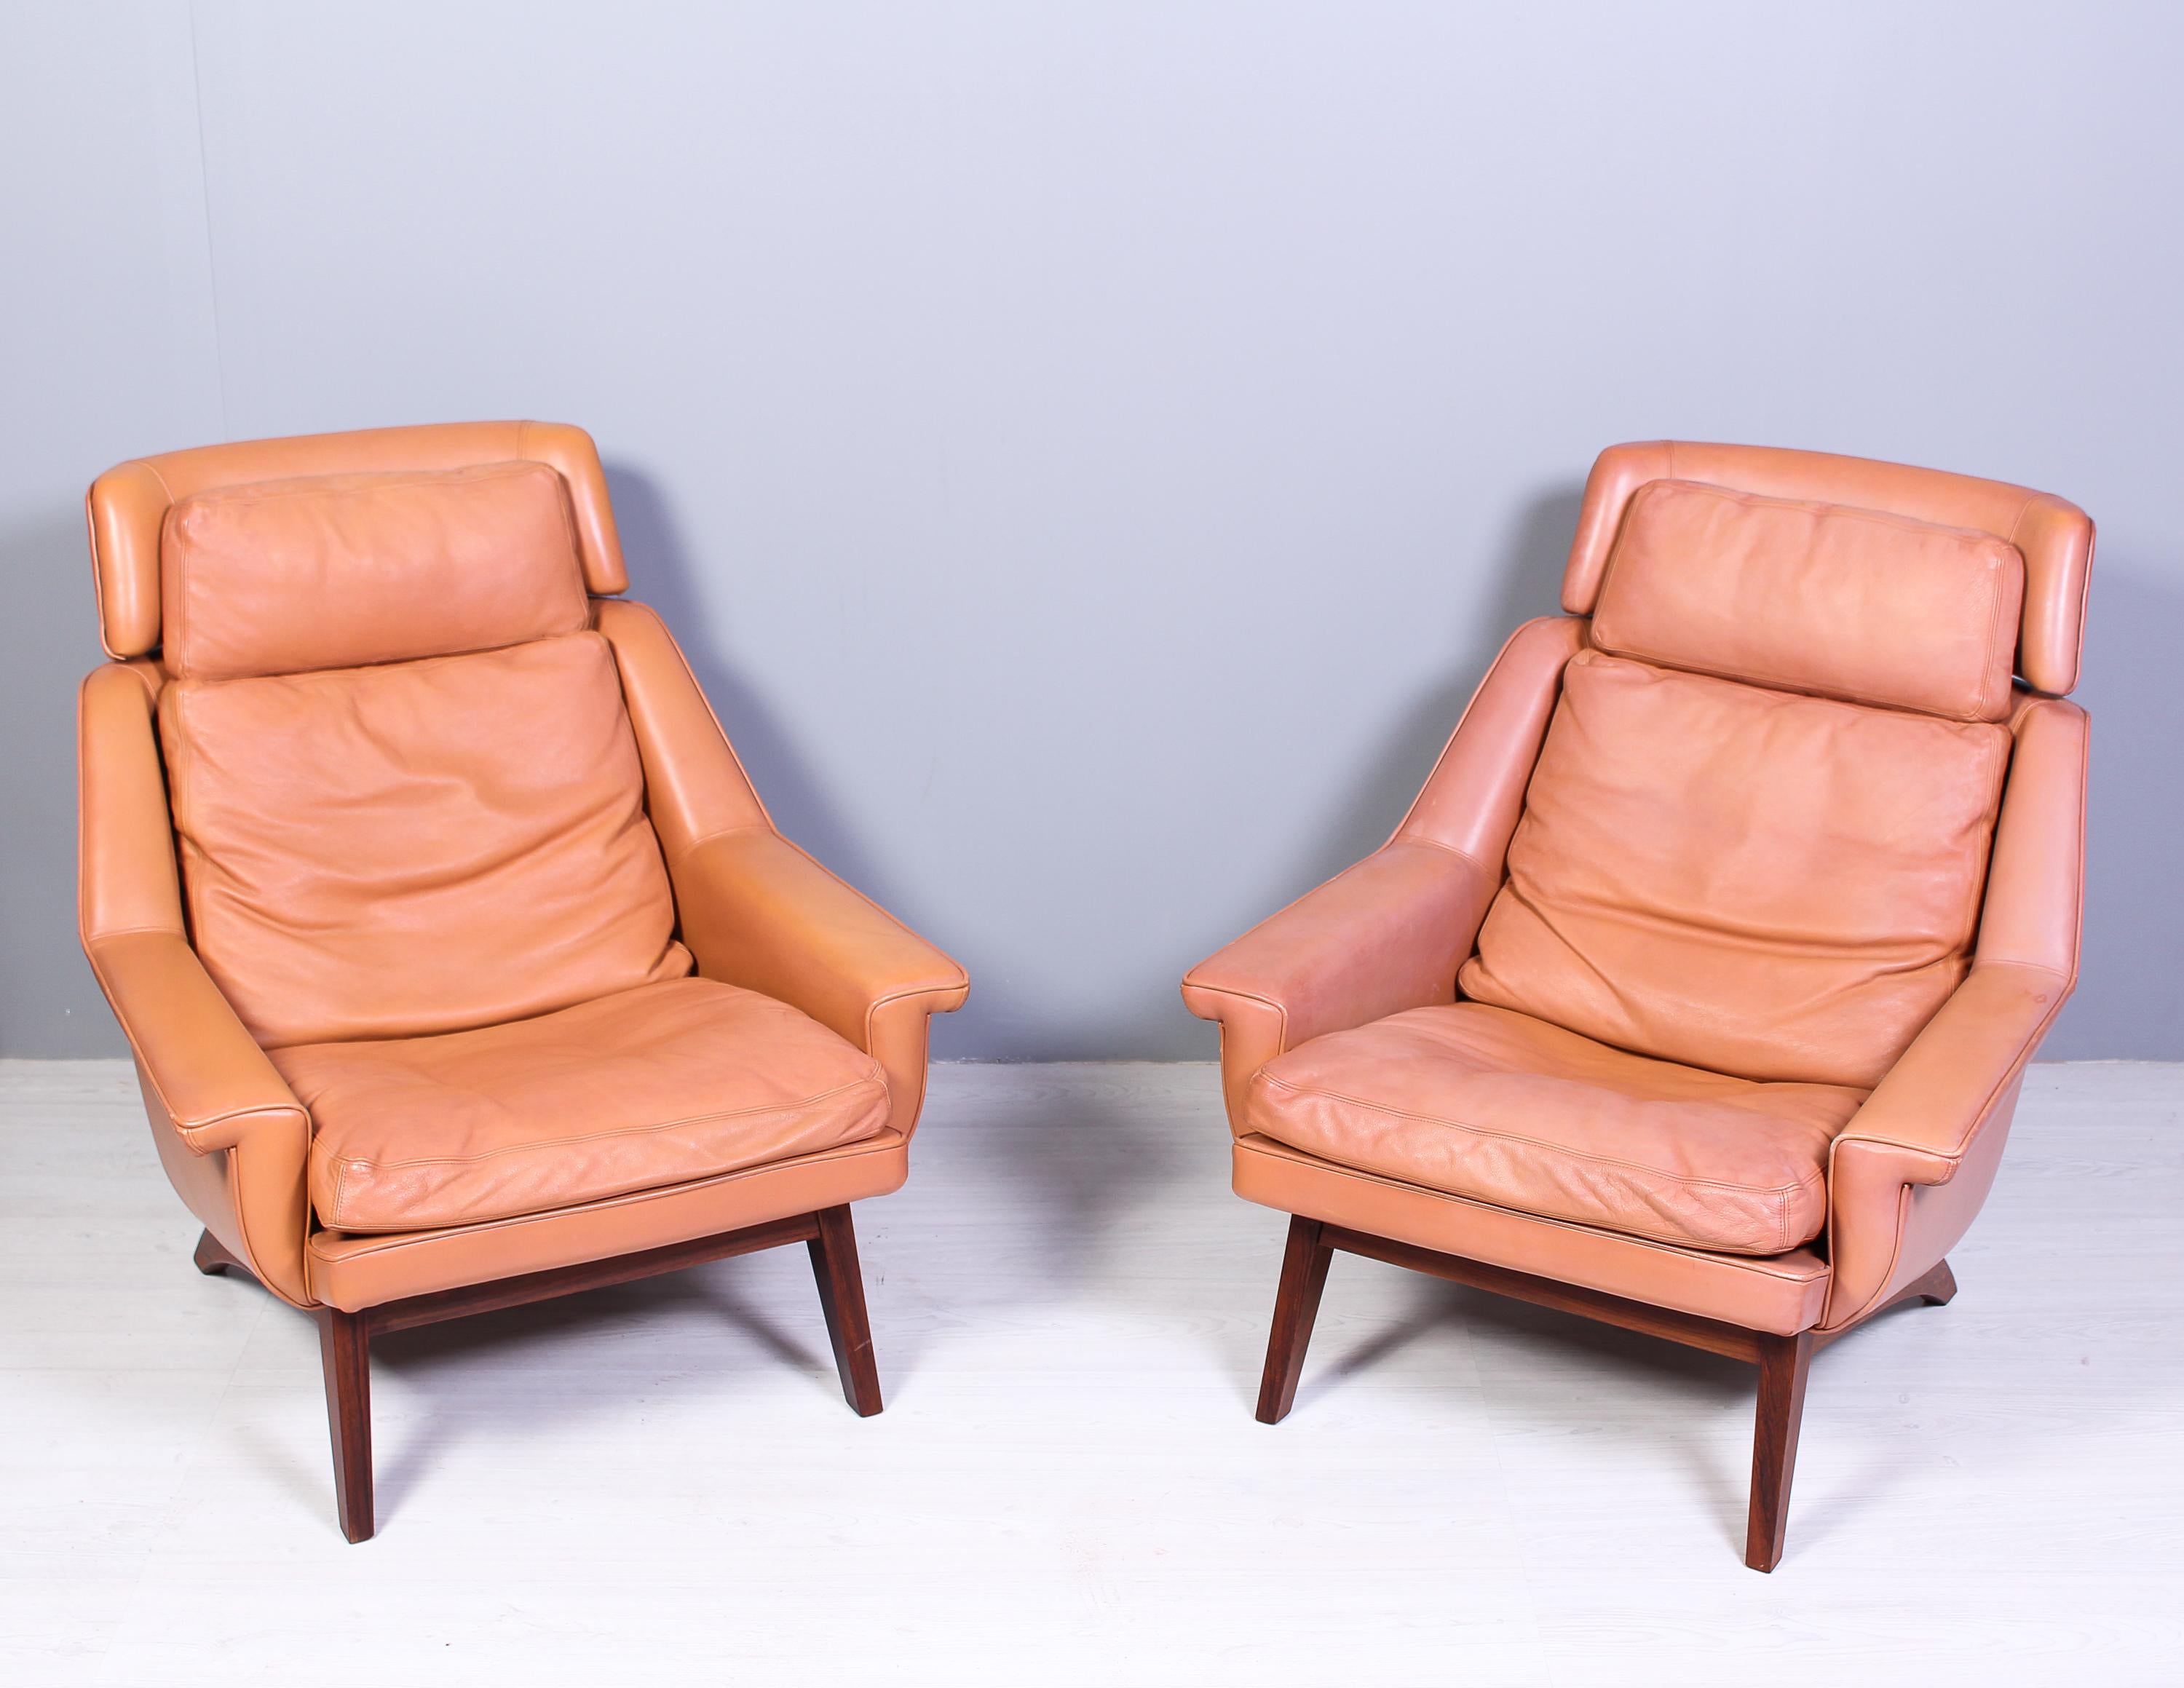 Scandinavian Modern Leather & Rosewood Lounge Chairs and Ottoman by Werner Langenfled, Denmark 1960s For Sale